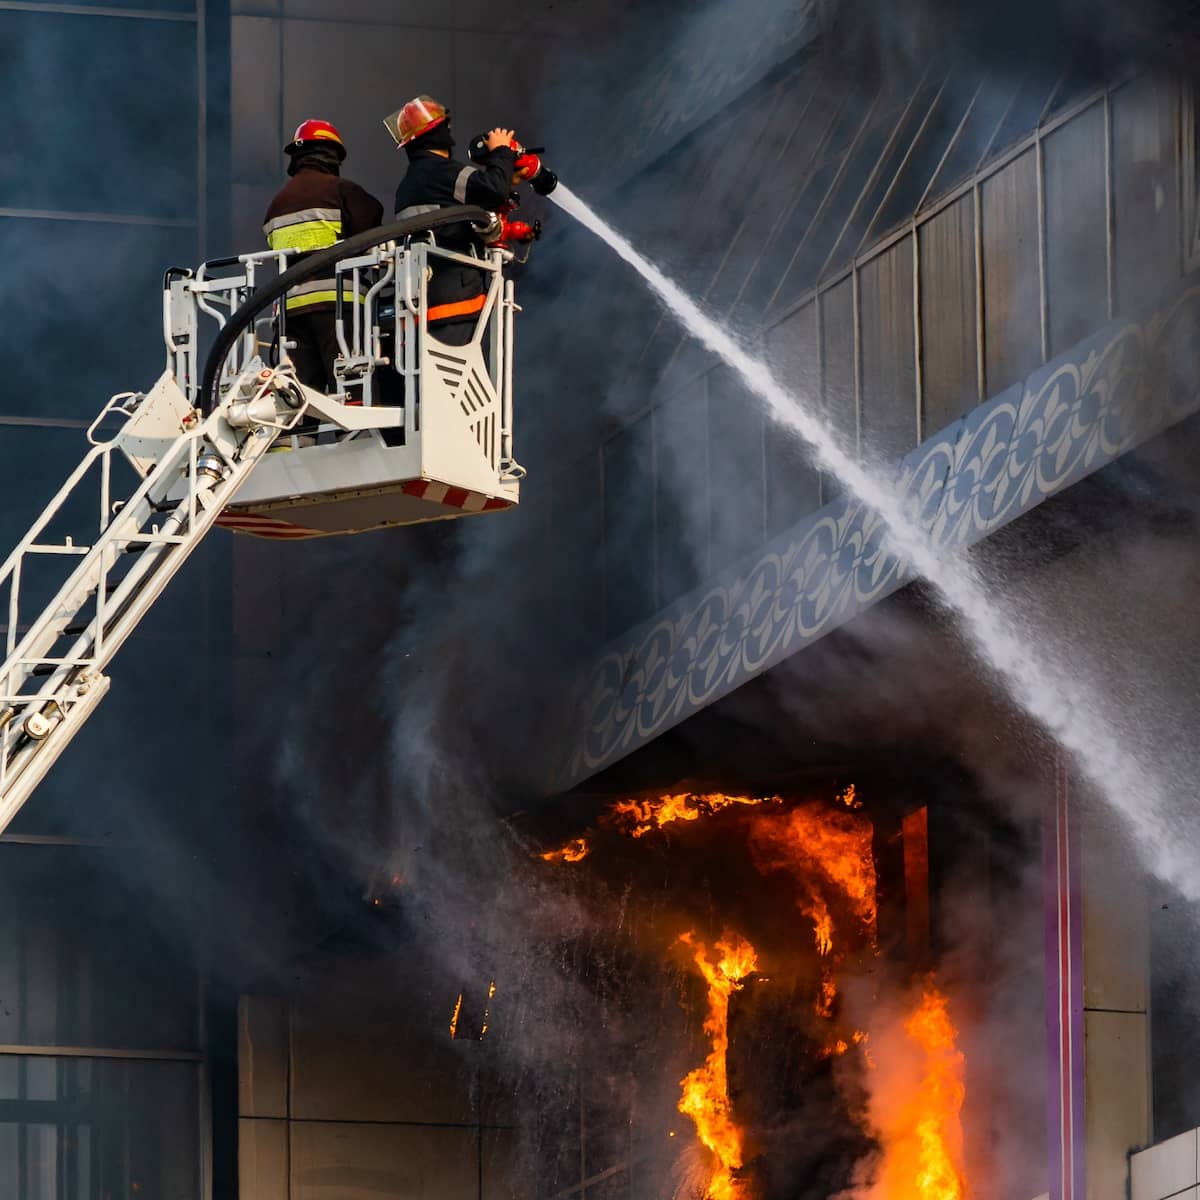 Firefighters on a bucket lift using water hoses to put out a fire at a commercial property | ATI Restoration